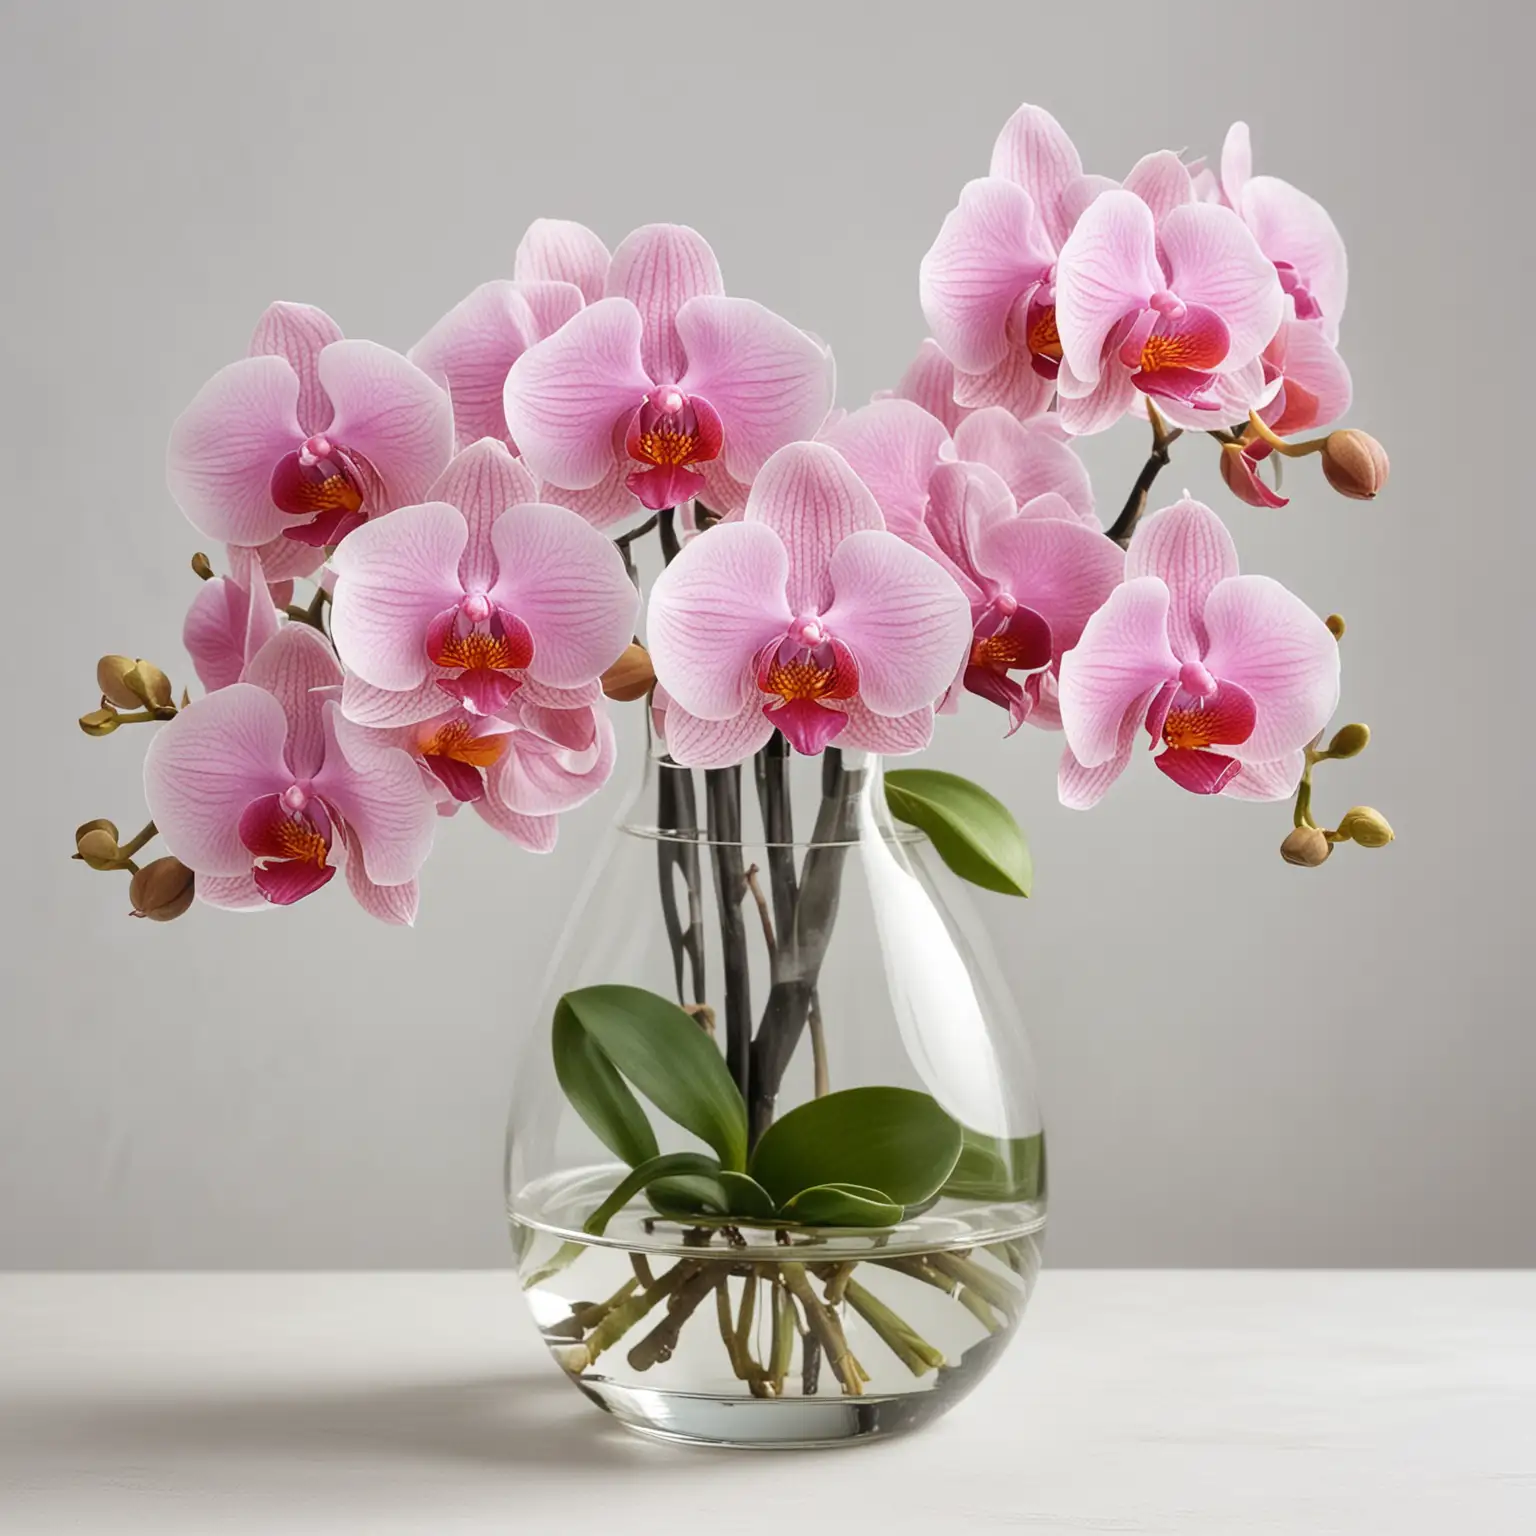 Pink Phalaenopsis Orchids in Glass Vase on White Background